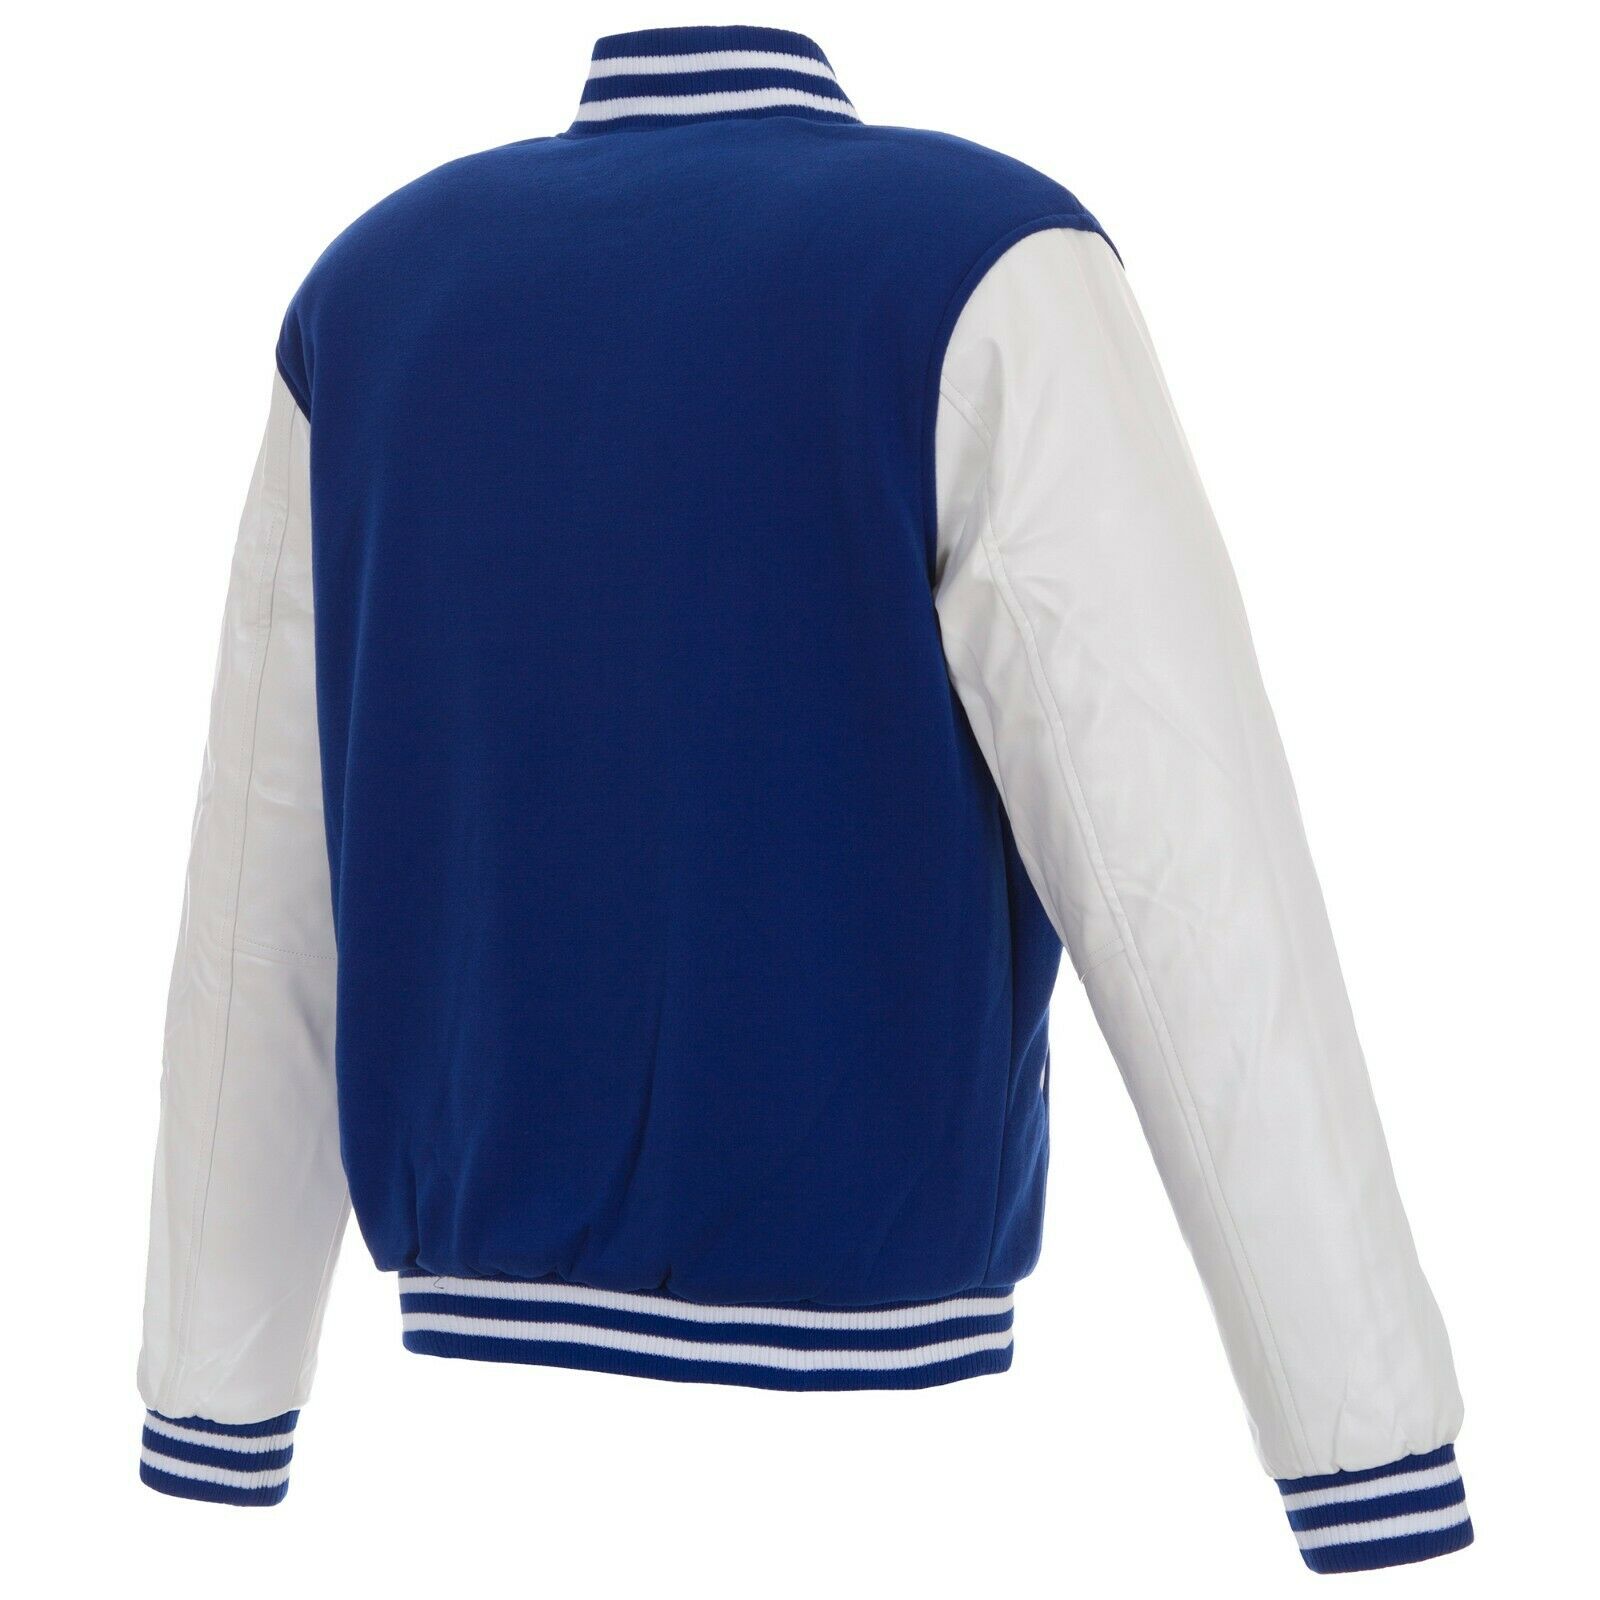 Men's JH Design Royal/White Toronto Maple Leafs Reversible Fleece Jacket with Faux Leather Sleeves